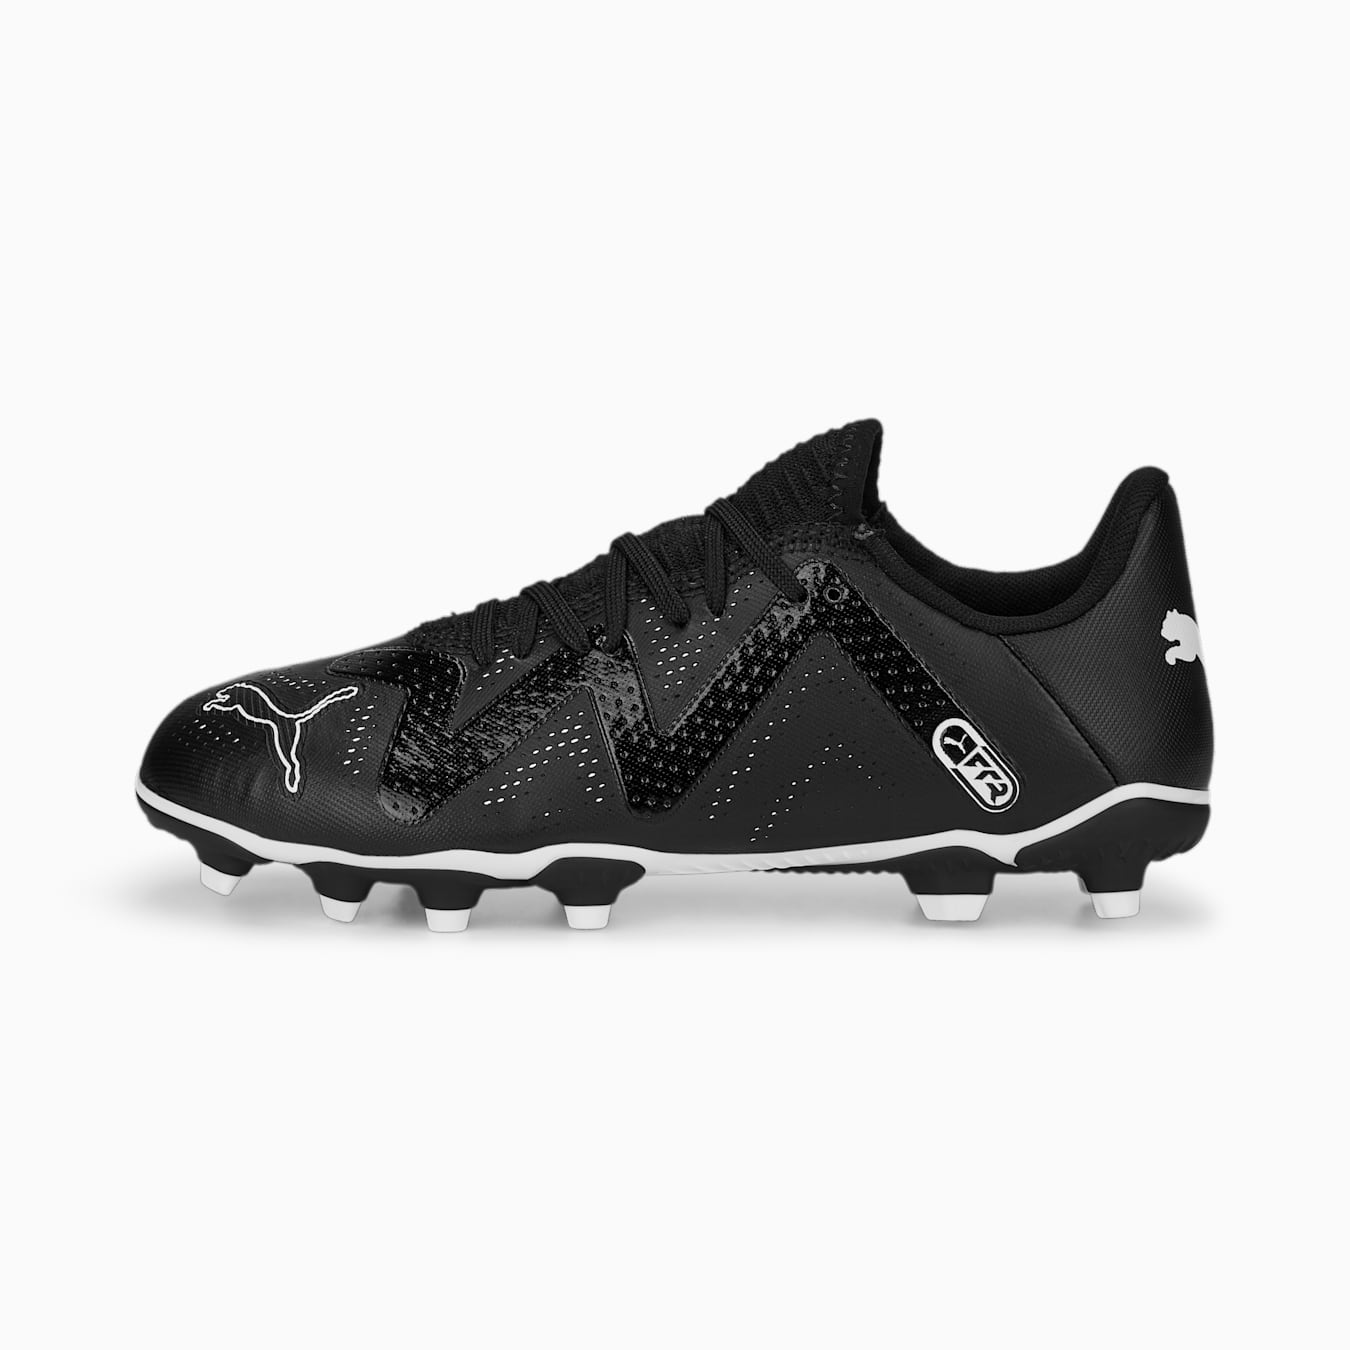 Puma Future Play FG/AG Kids Firm Ground Soccer Cleats